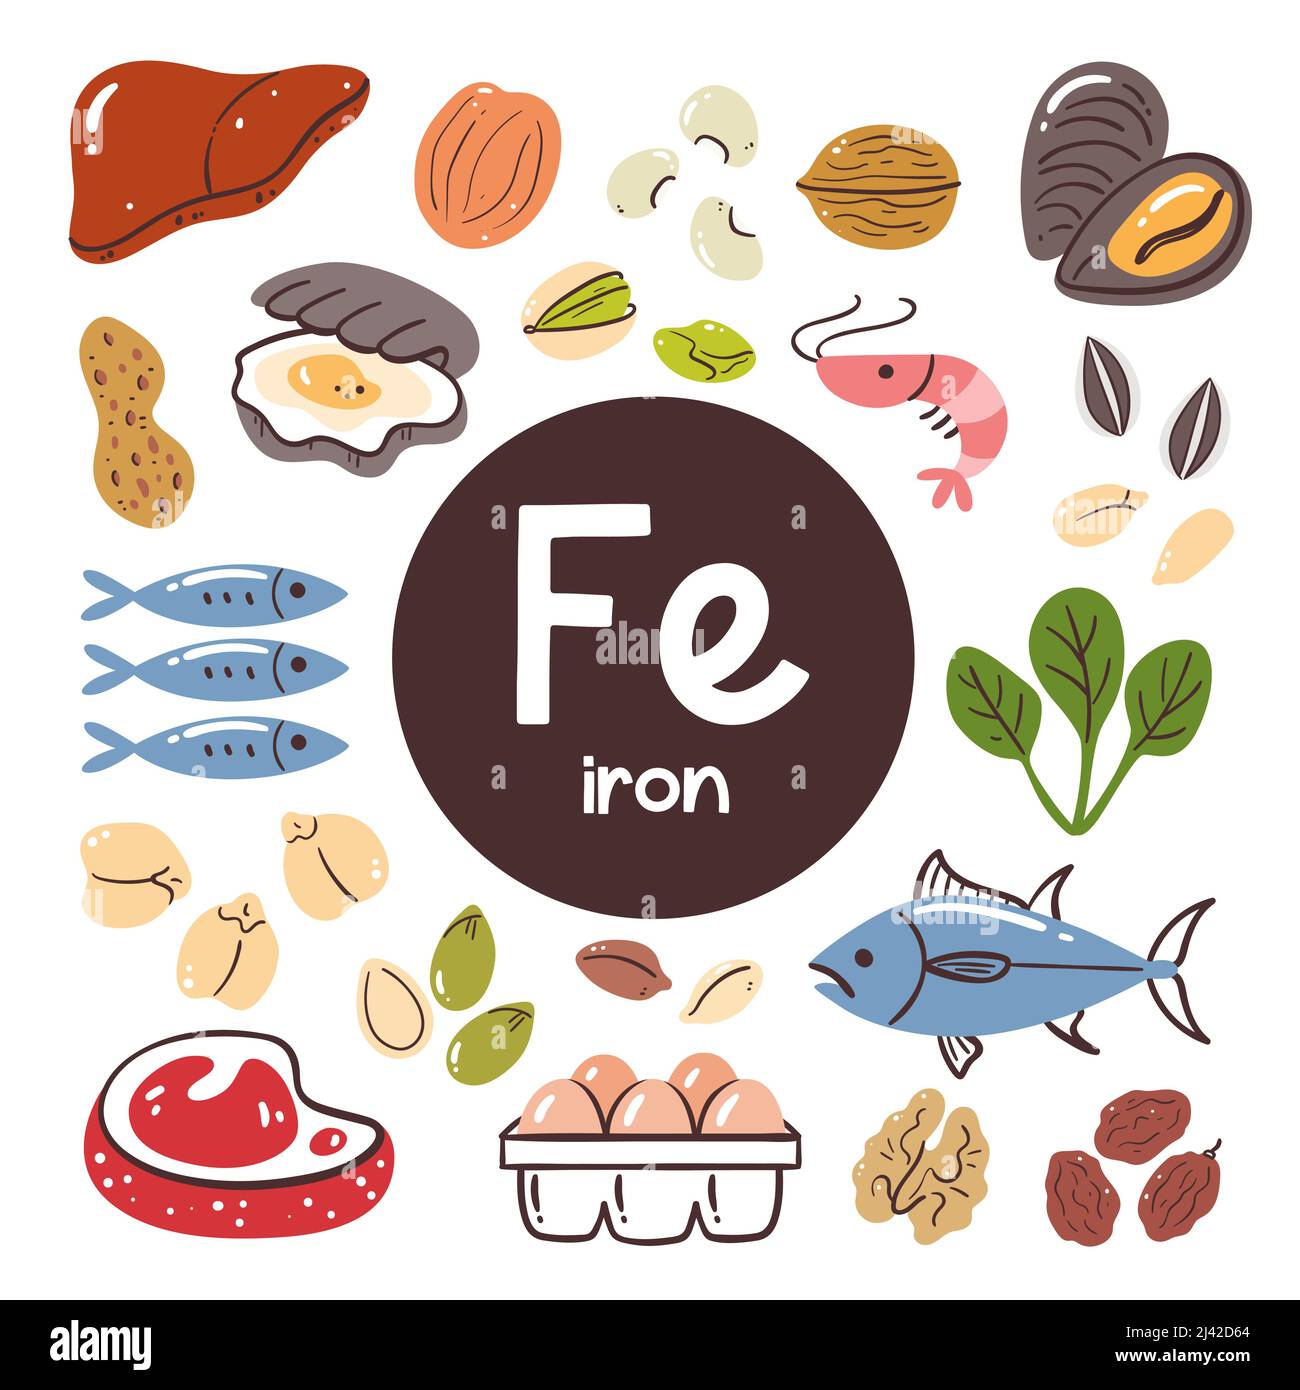 Food products with high level of Iron. Cooking ingredients. Meat, vegetables, nuts, legumes, seeds, seafood. Stock Vector